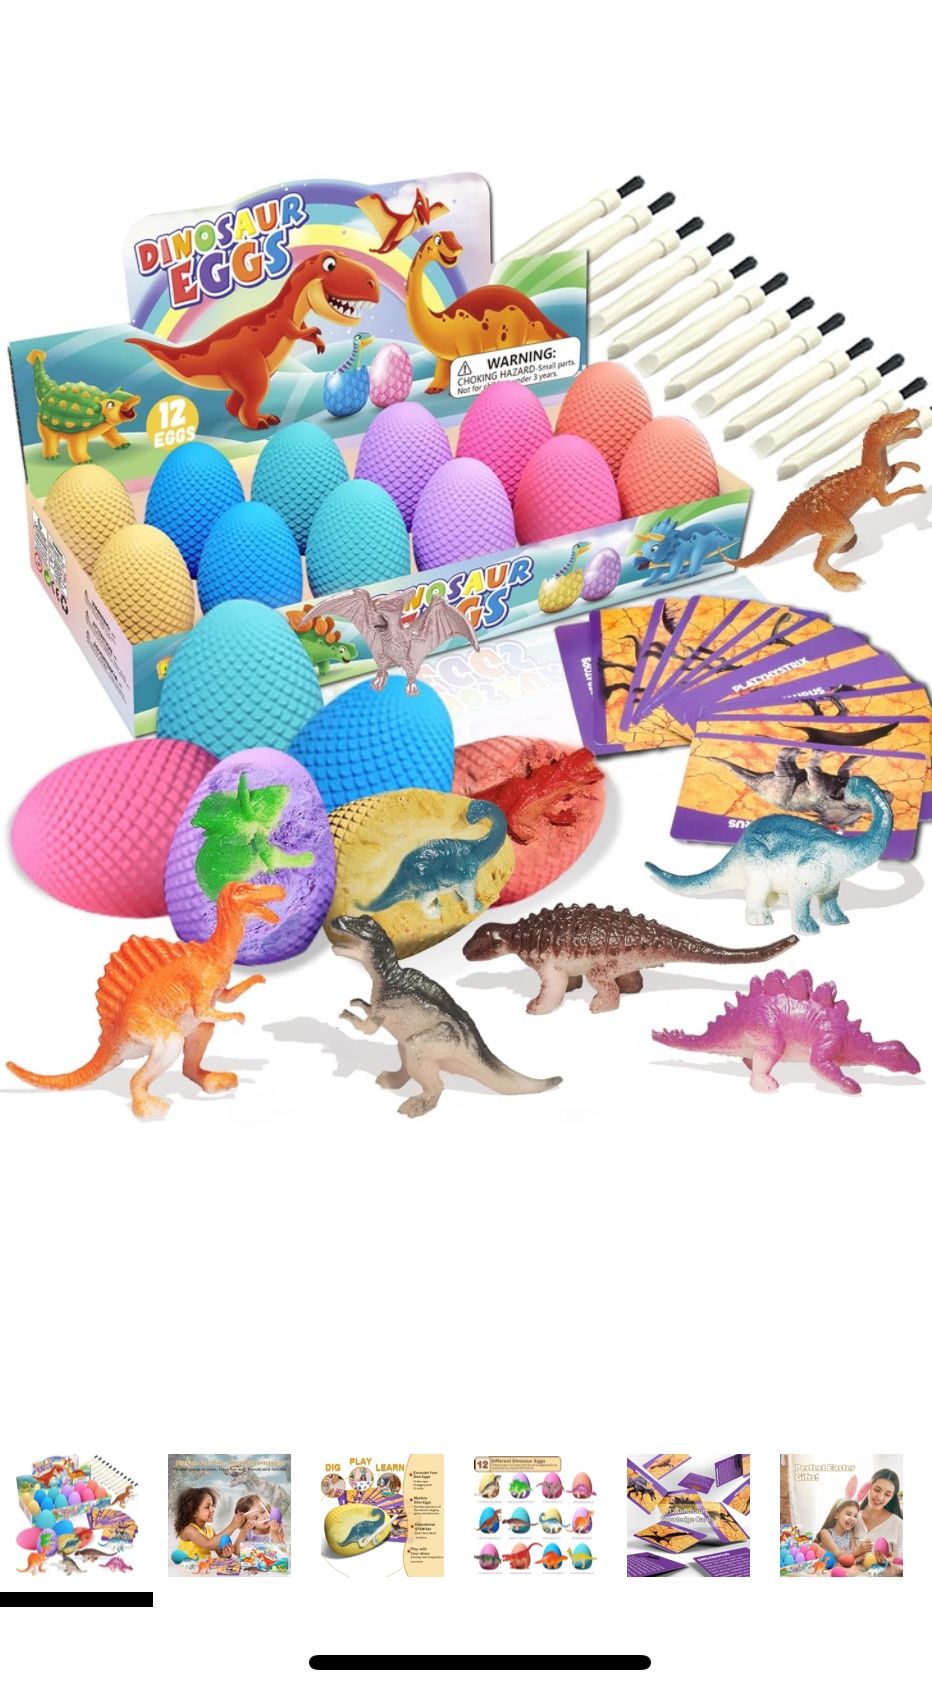 Dinosaur Eggs Dig Kit Toys - 12 Dino Easter Eggs Fossil Eggs Excavation Kits for Kids Easter Party Favor Basket Stuffers Toy Birthday Christmas Gifts 